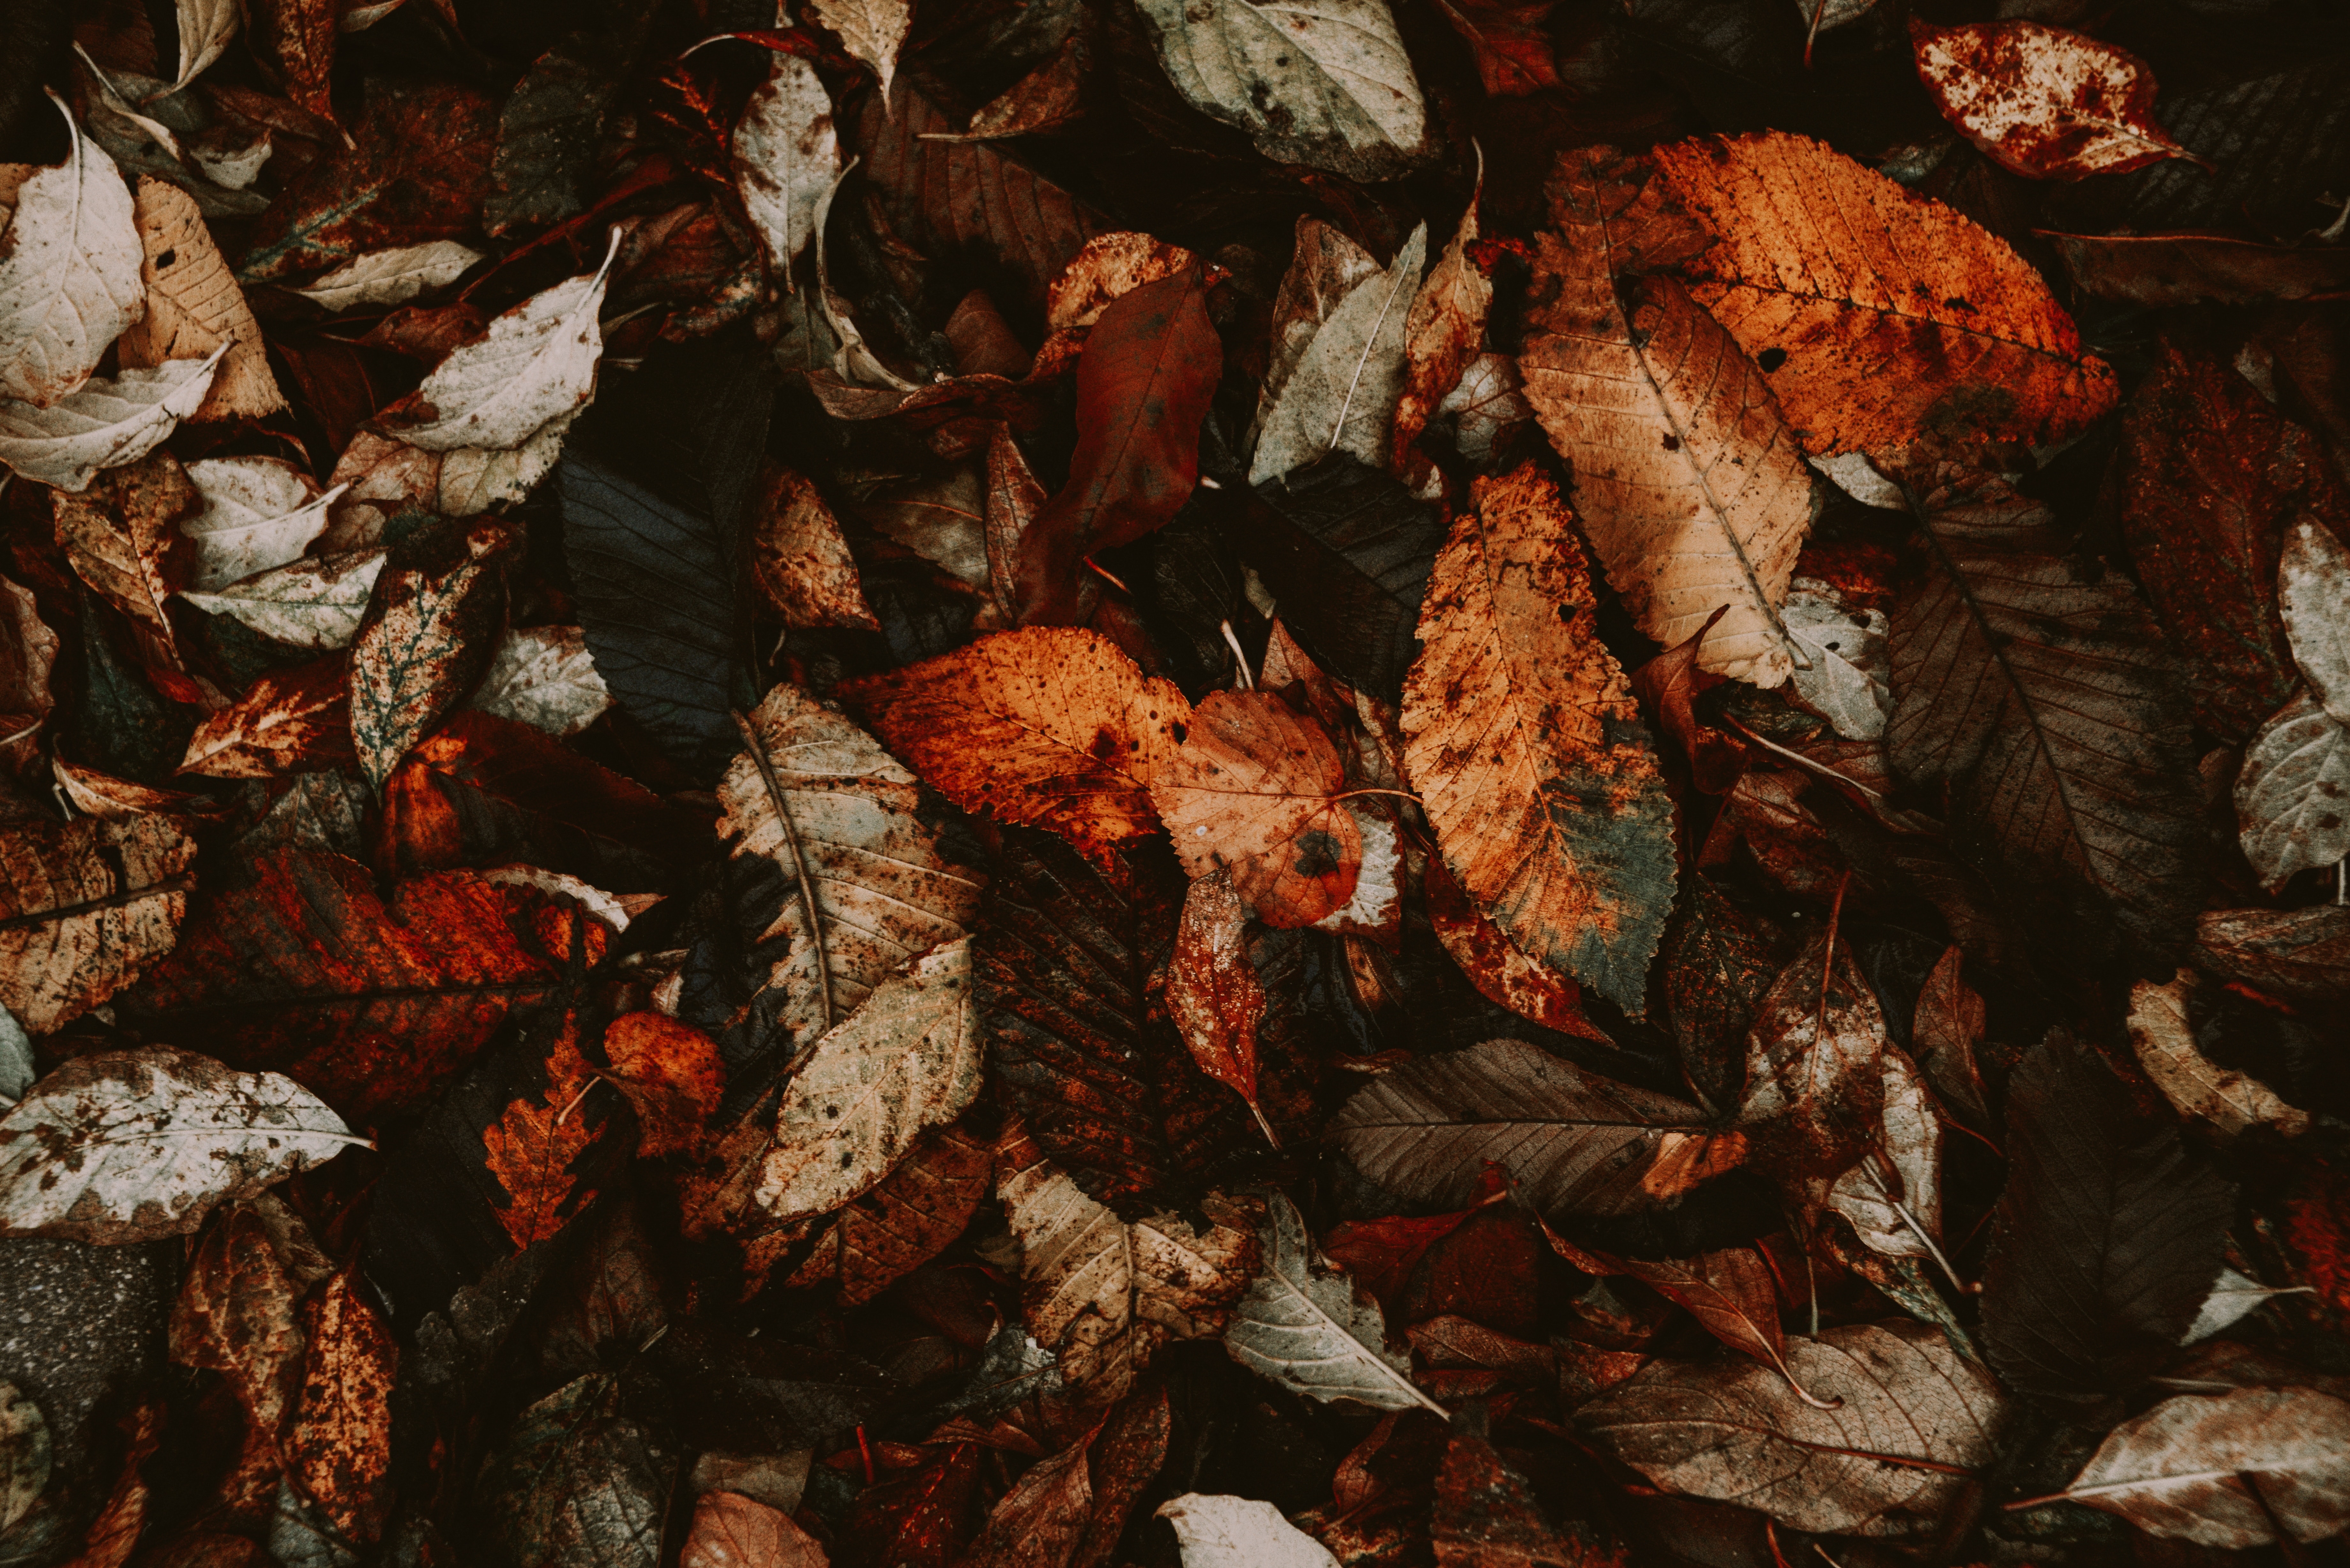 93559 Screensavers and Wallpapers Fallen for phone. Download autumn, leaves, macro, foliage, dry, fallen pictures for free